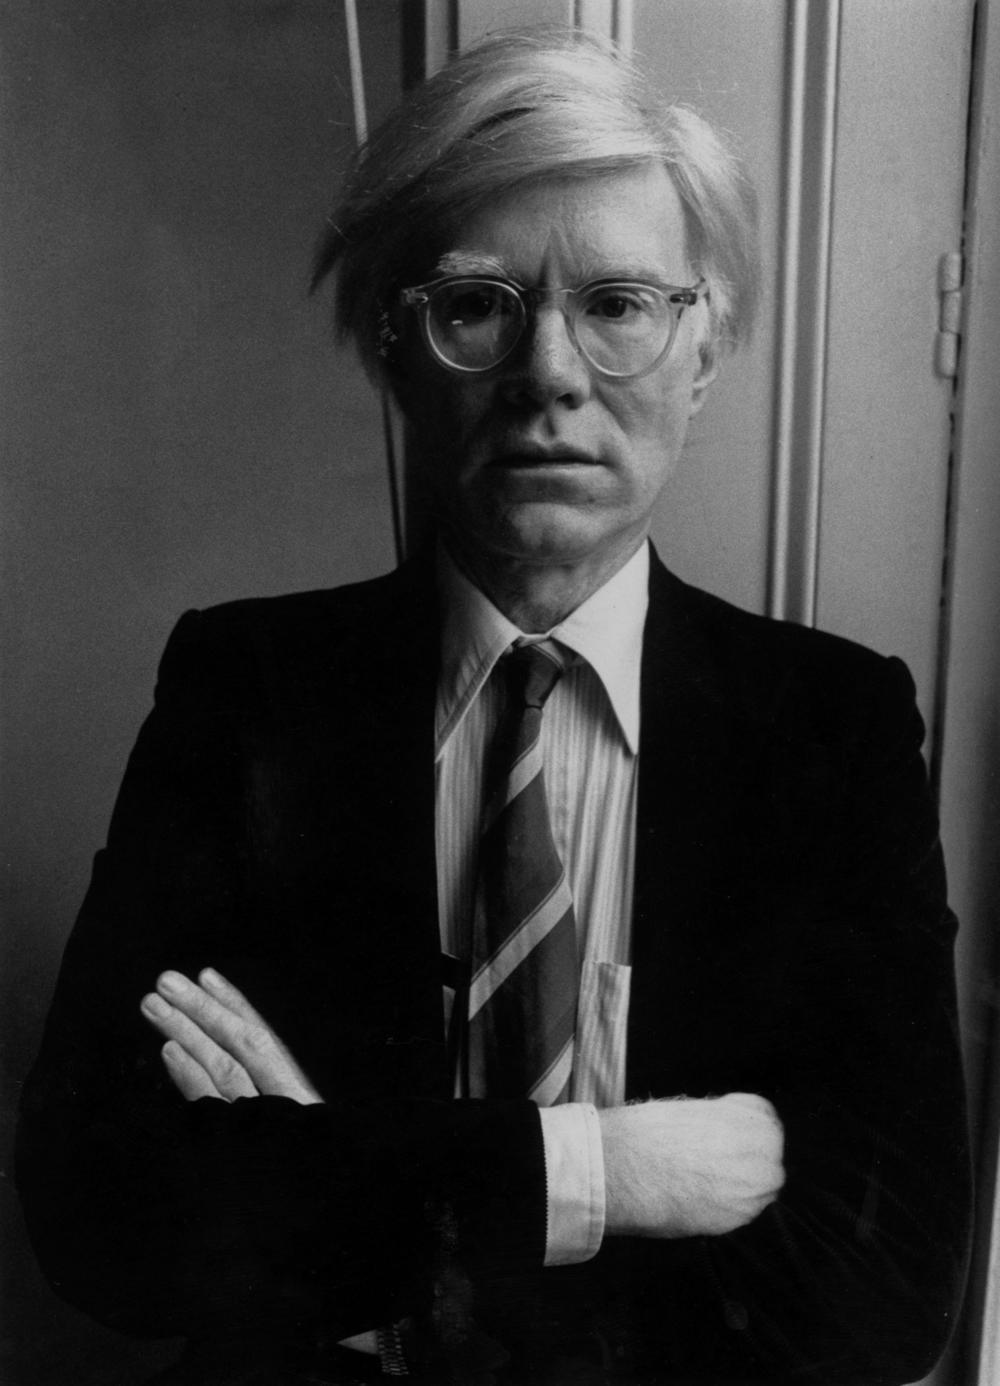 Andy Warhol pictured in February 1980.